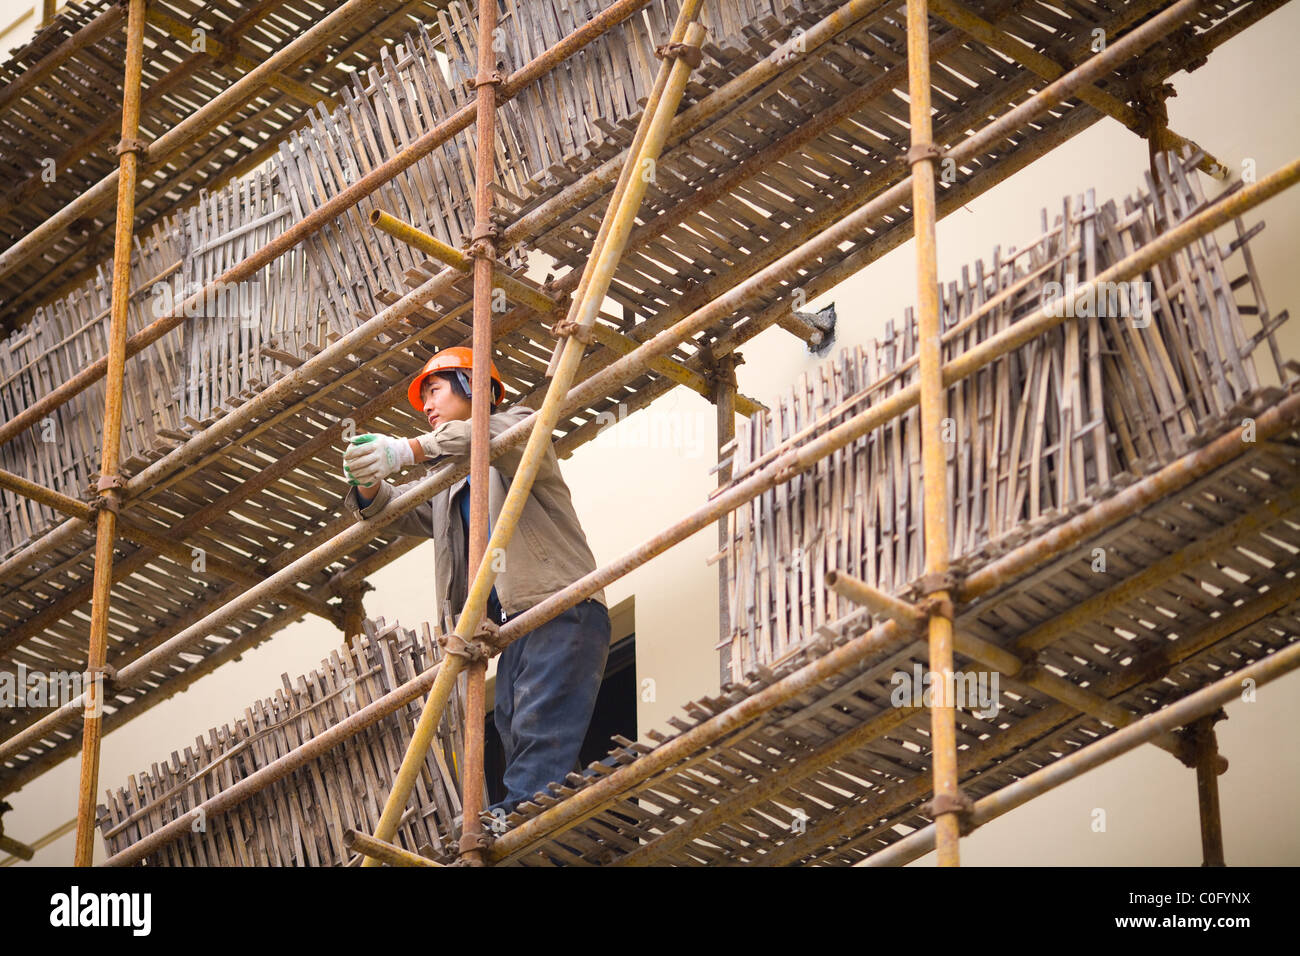 Worker in traditional Chinese scaffolding, Shanghai, China Stock Photo